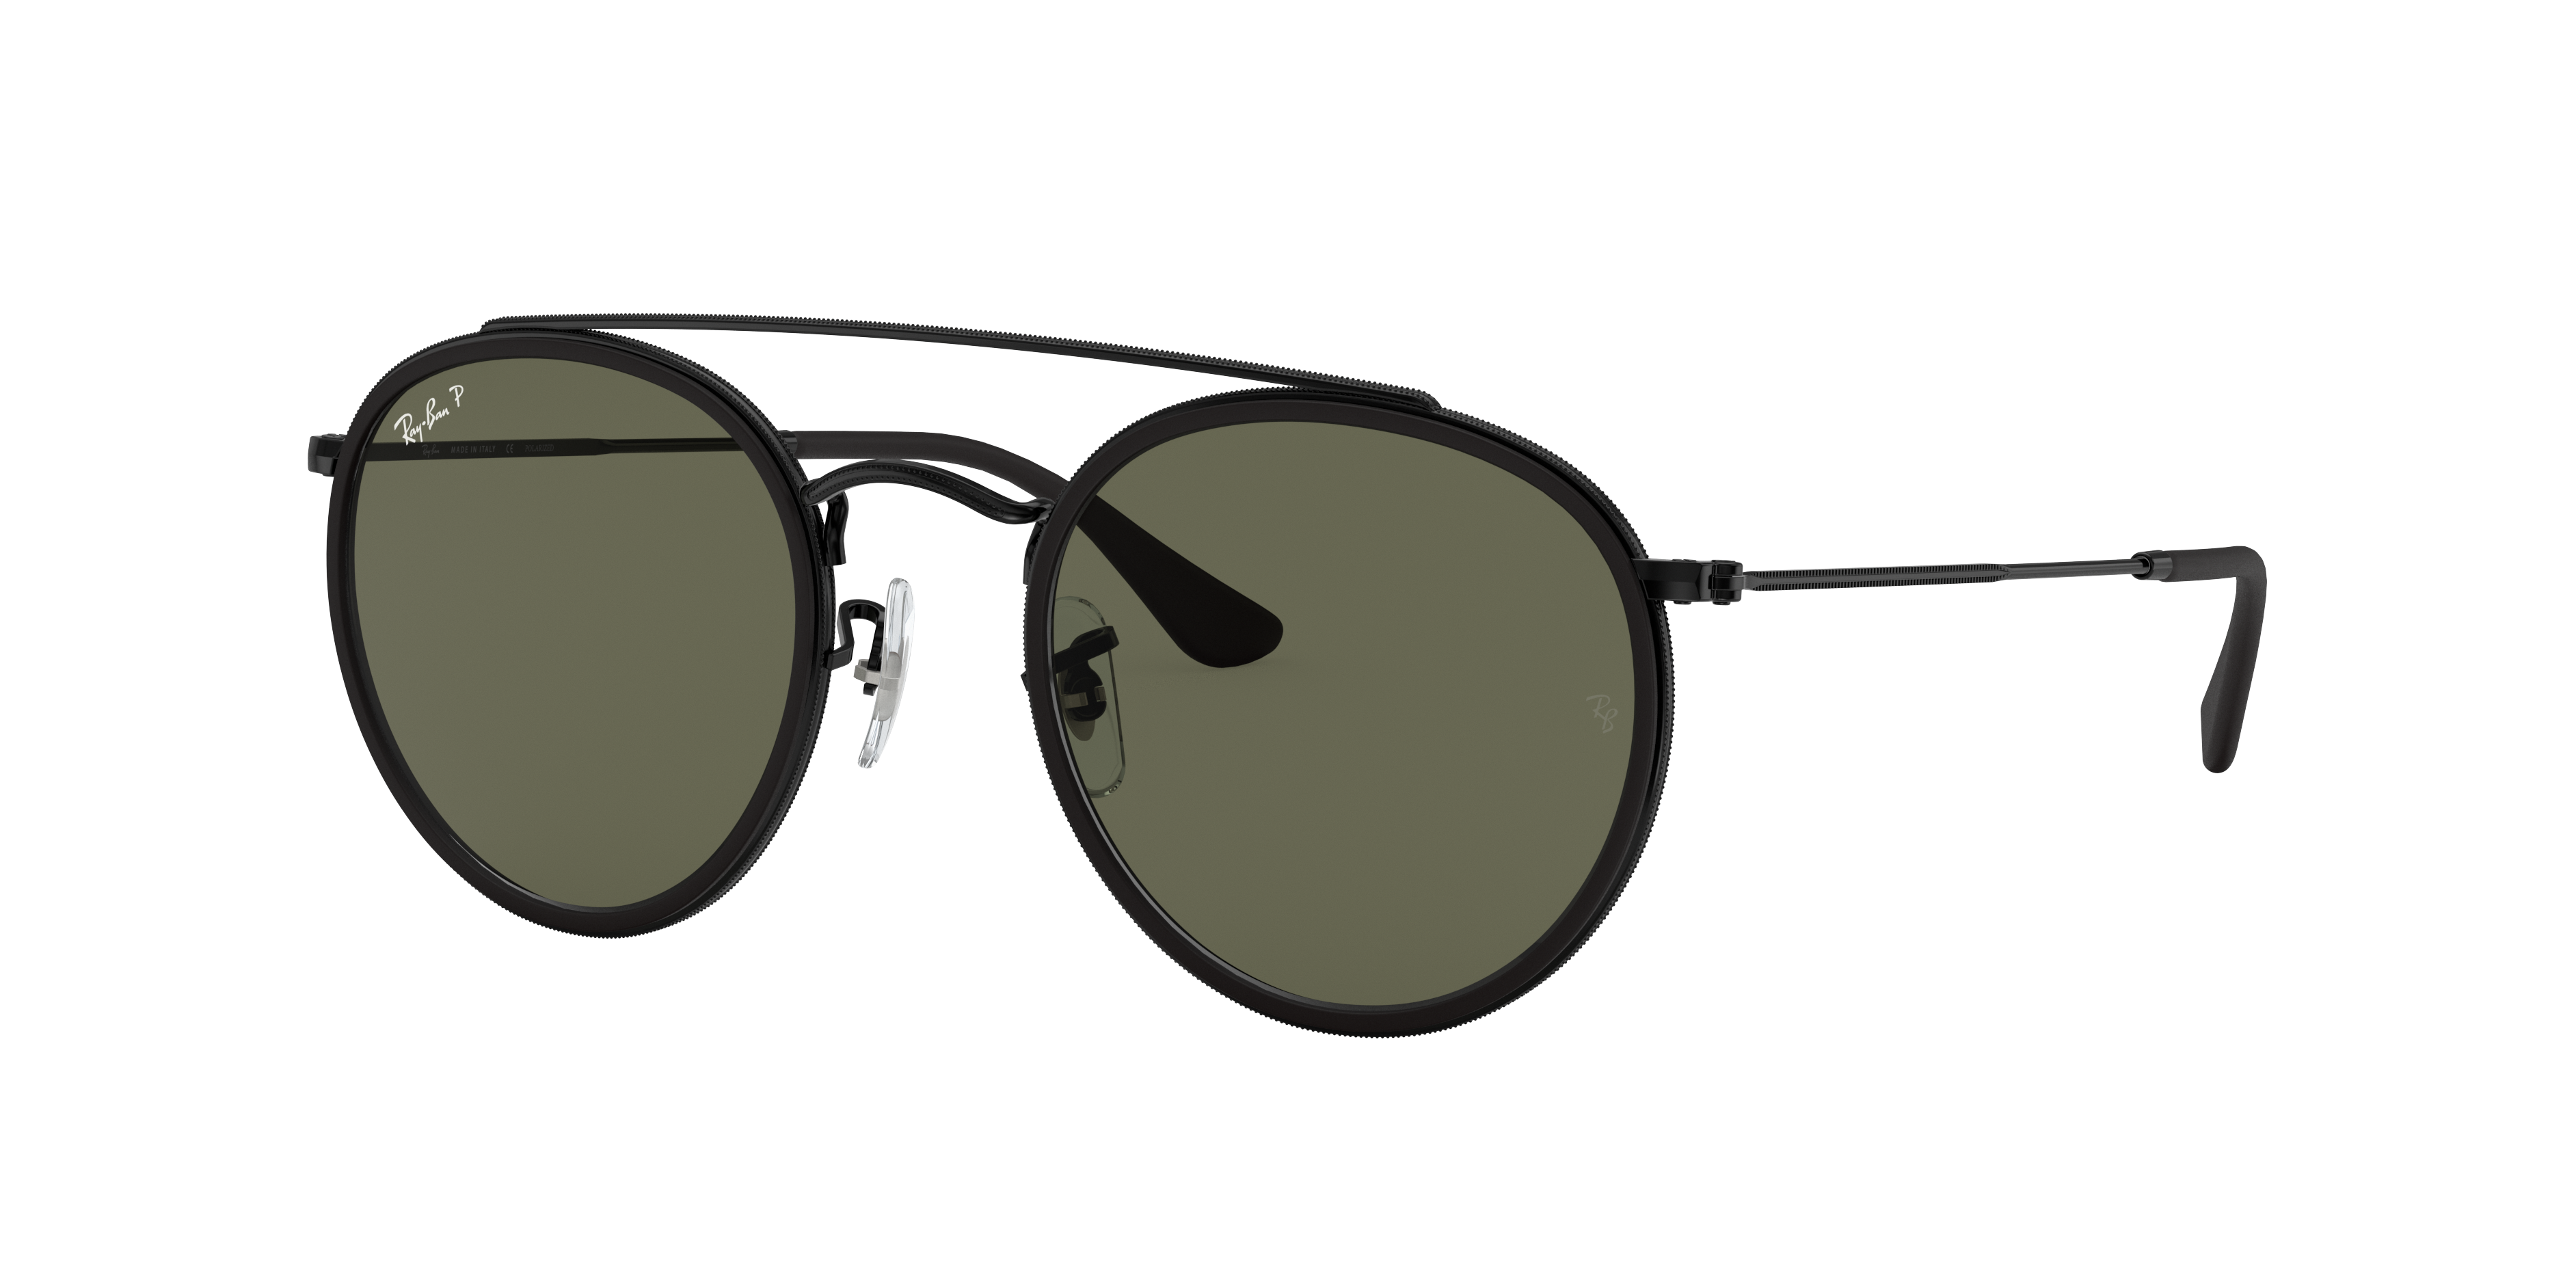 Check out the Round Double Bridge at ray-ban.com